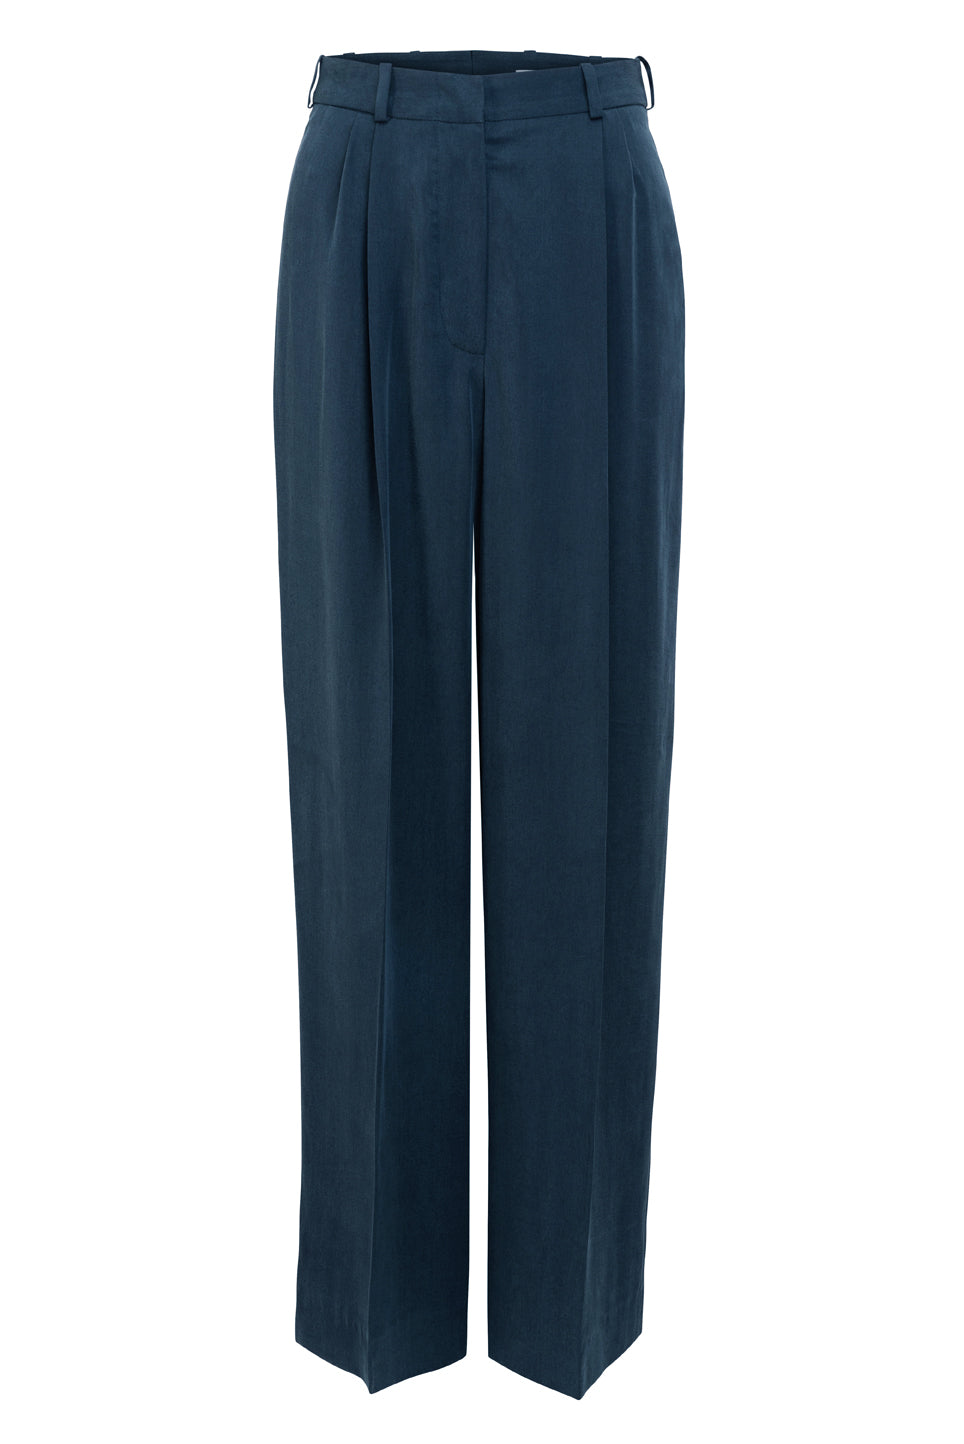 02/2 High Waisted Pants Navy front - hello'ben store